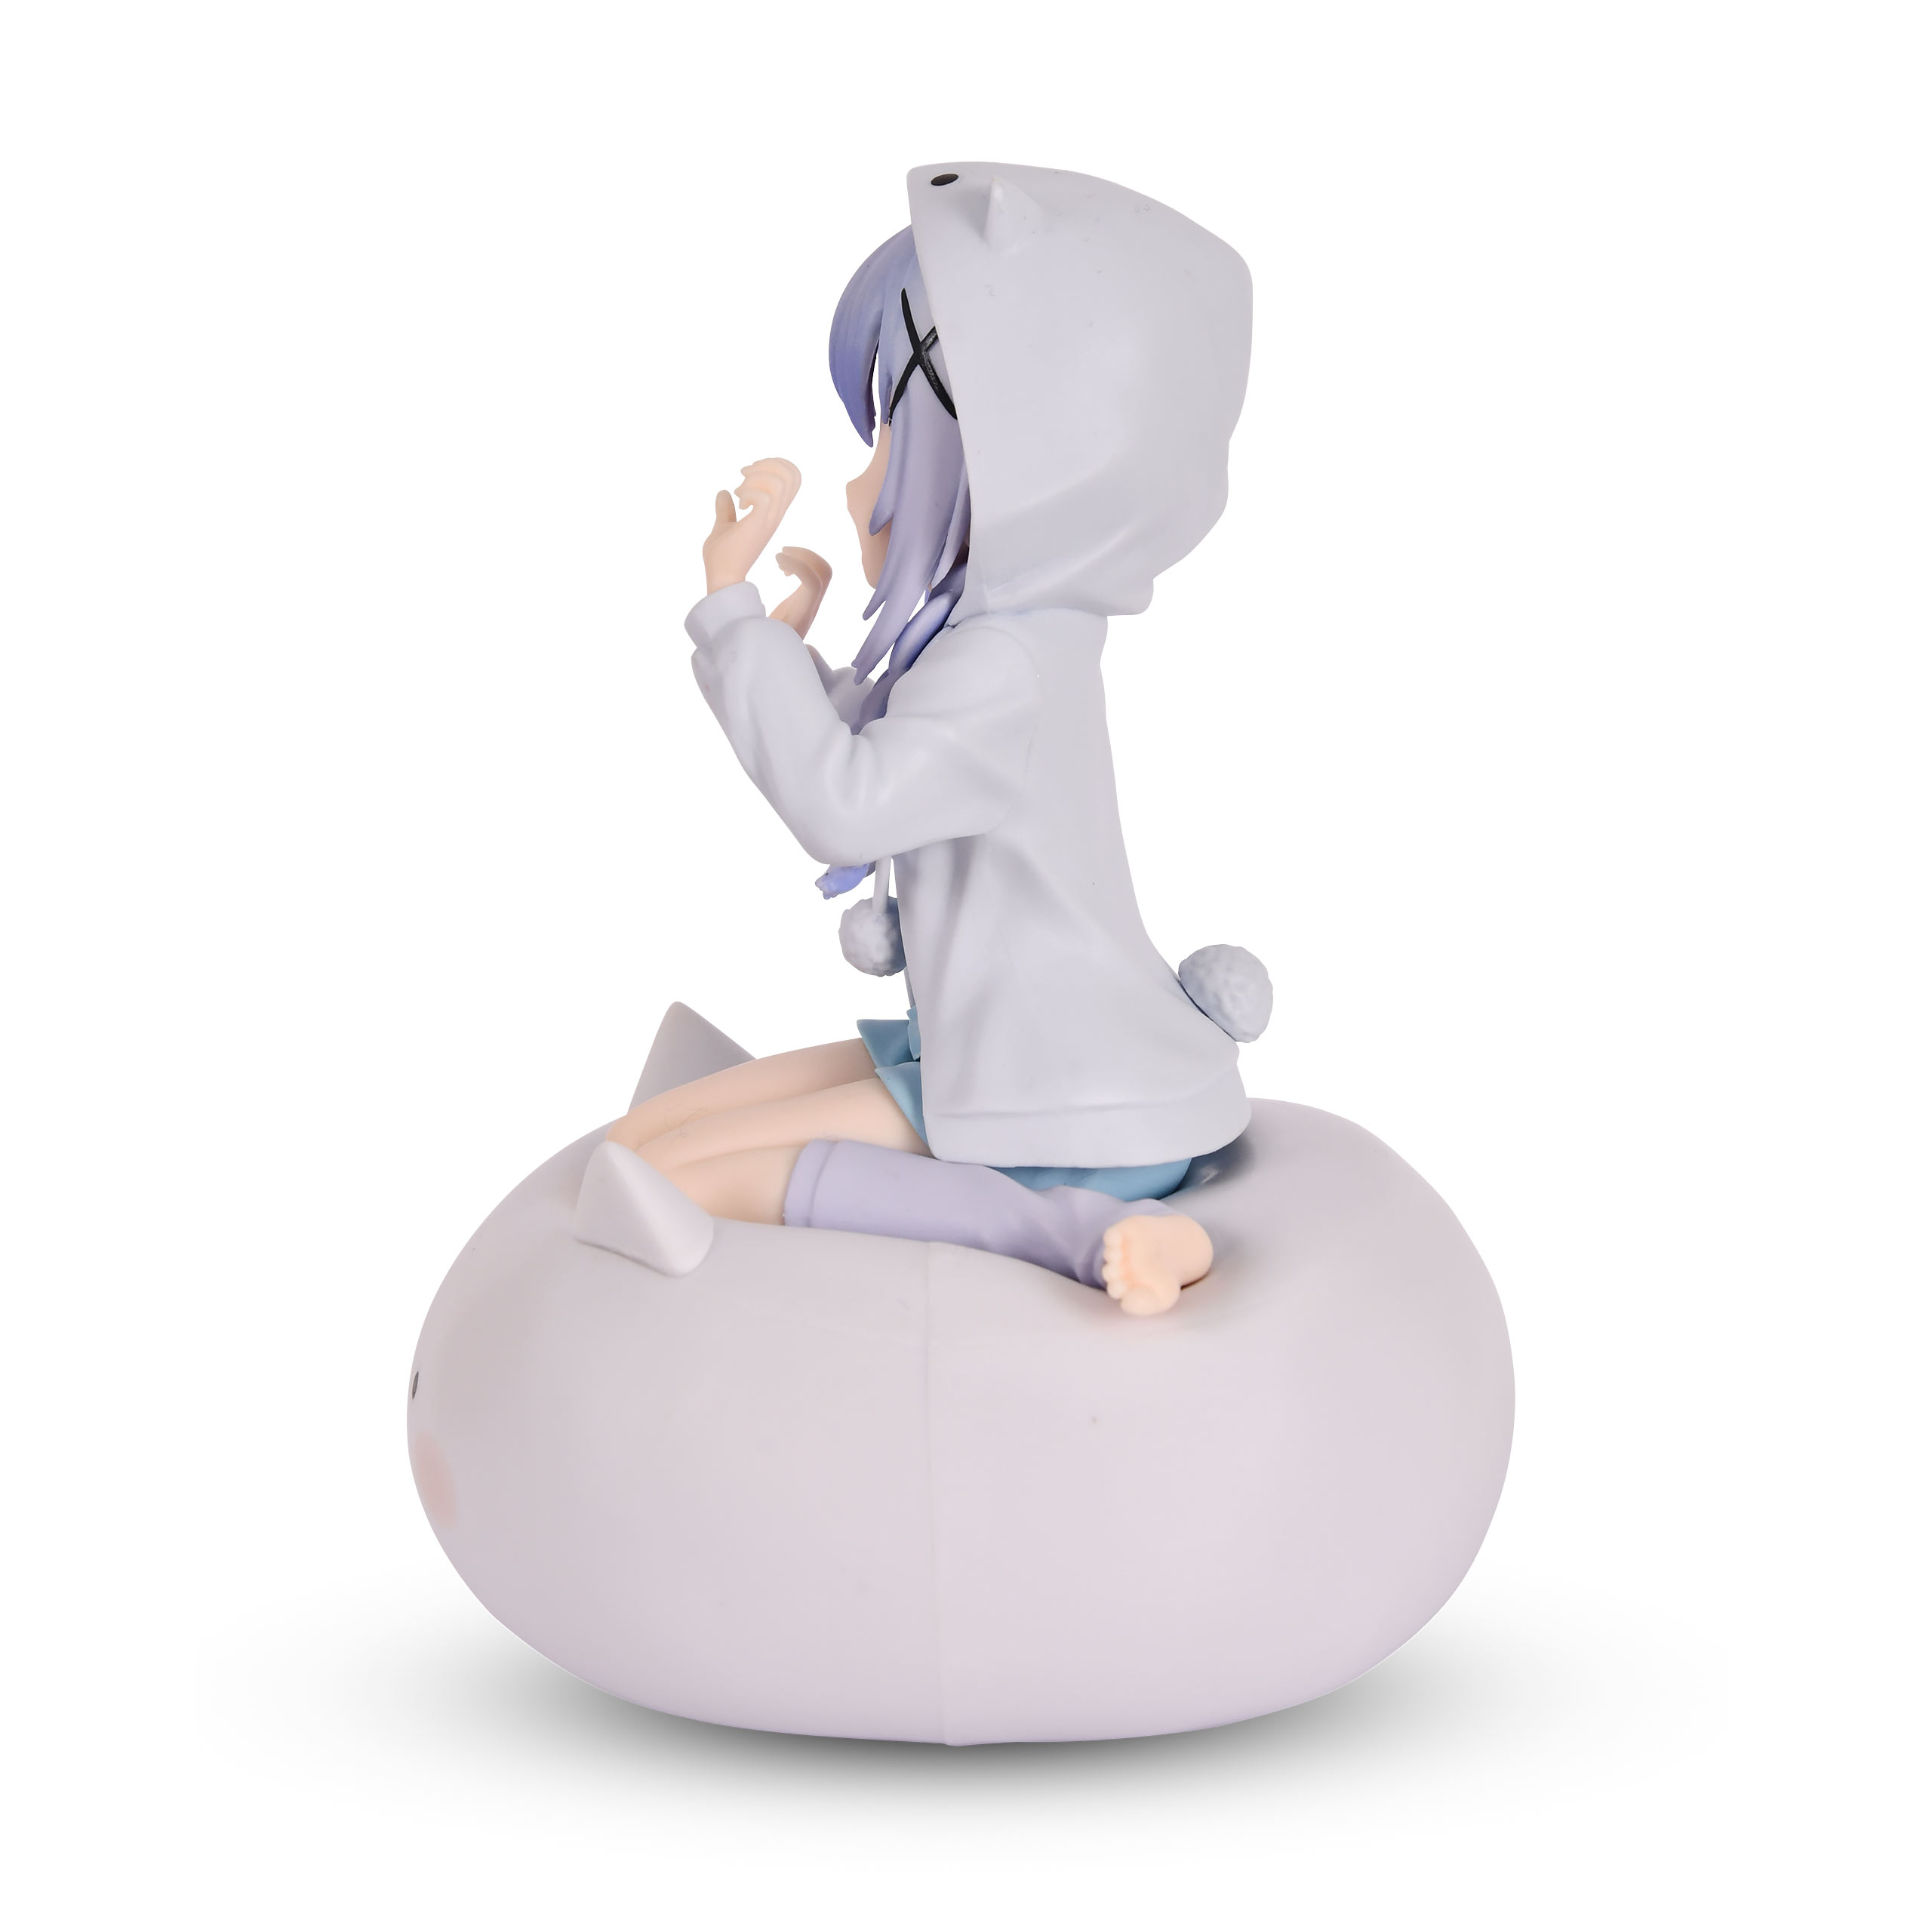 Is the Order a Rabbit - BLOOM Chino Rabbit House Tea Party Figur